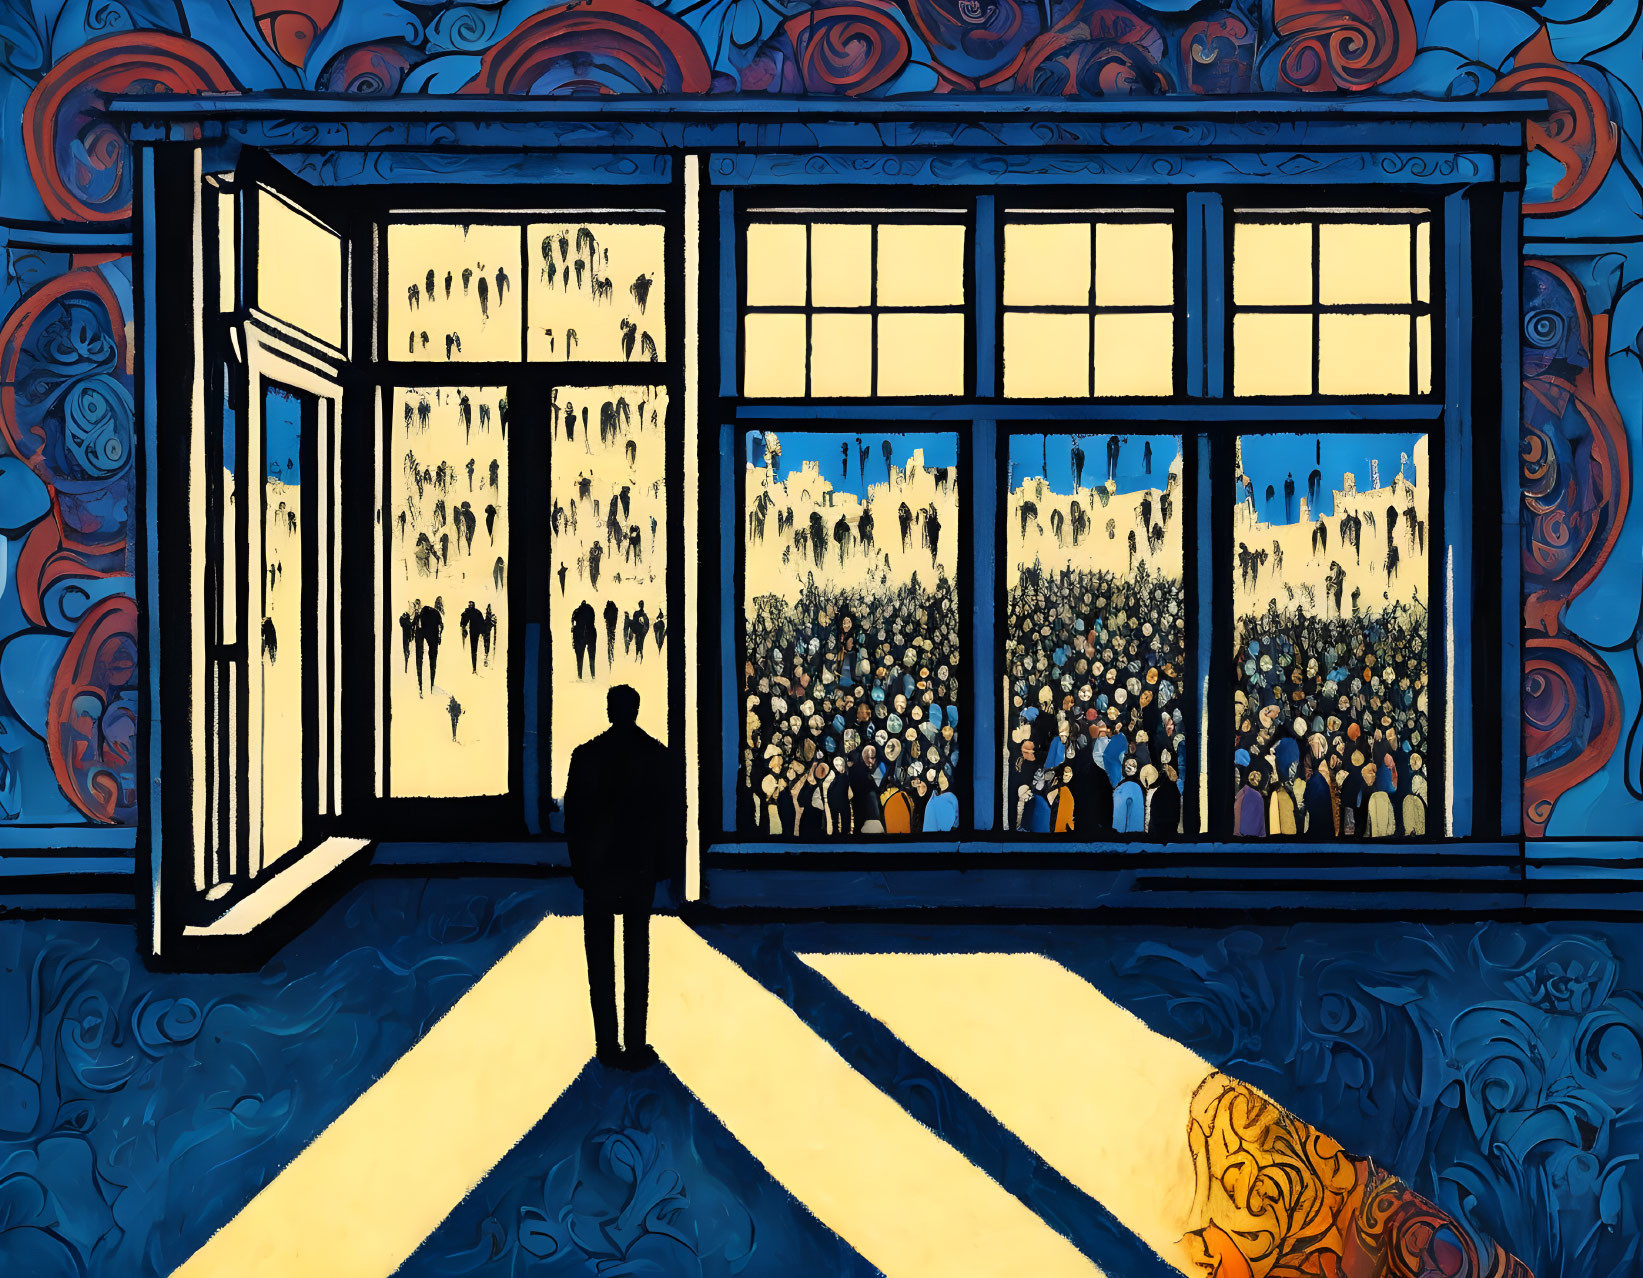 Expressive silhouette against vibrant window scene with blue and yellow tones